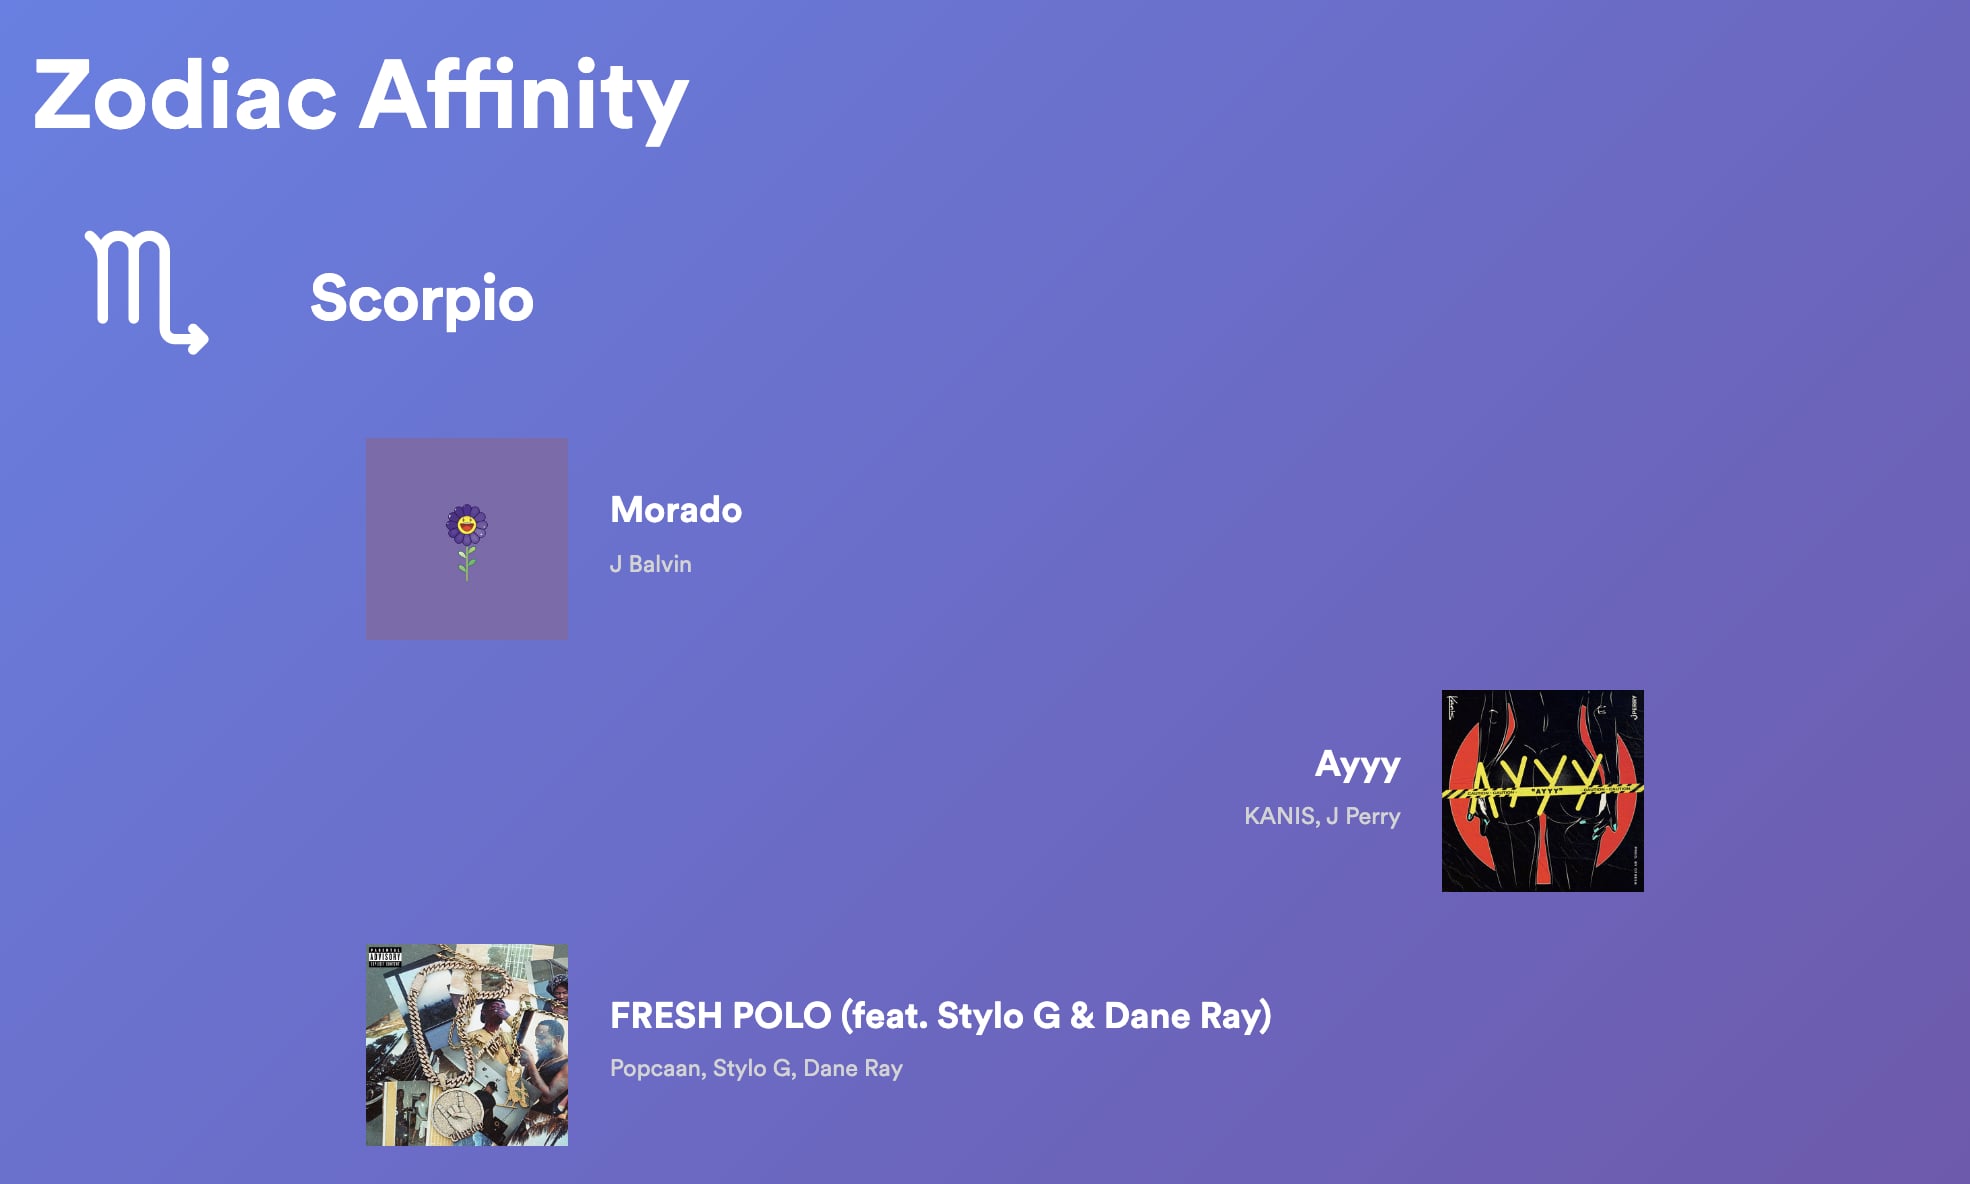 Zodiac Affinity card for Scorpio is purple with white letters. Songs included are Morado by J Balvin, Ayyy by Kanis, and Fresh Polo by Popcorn.